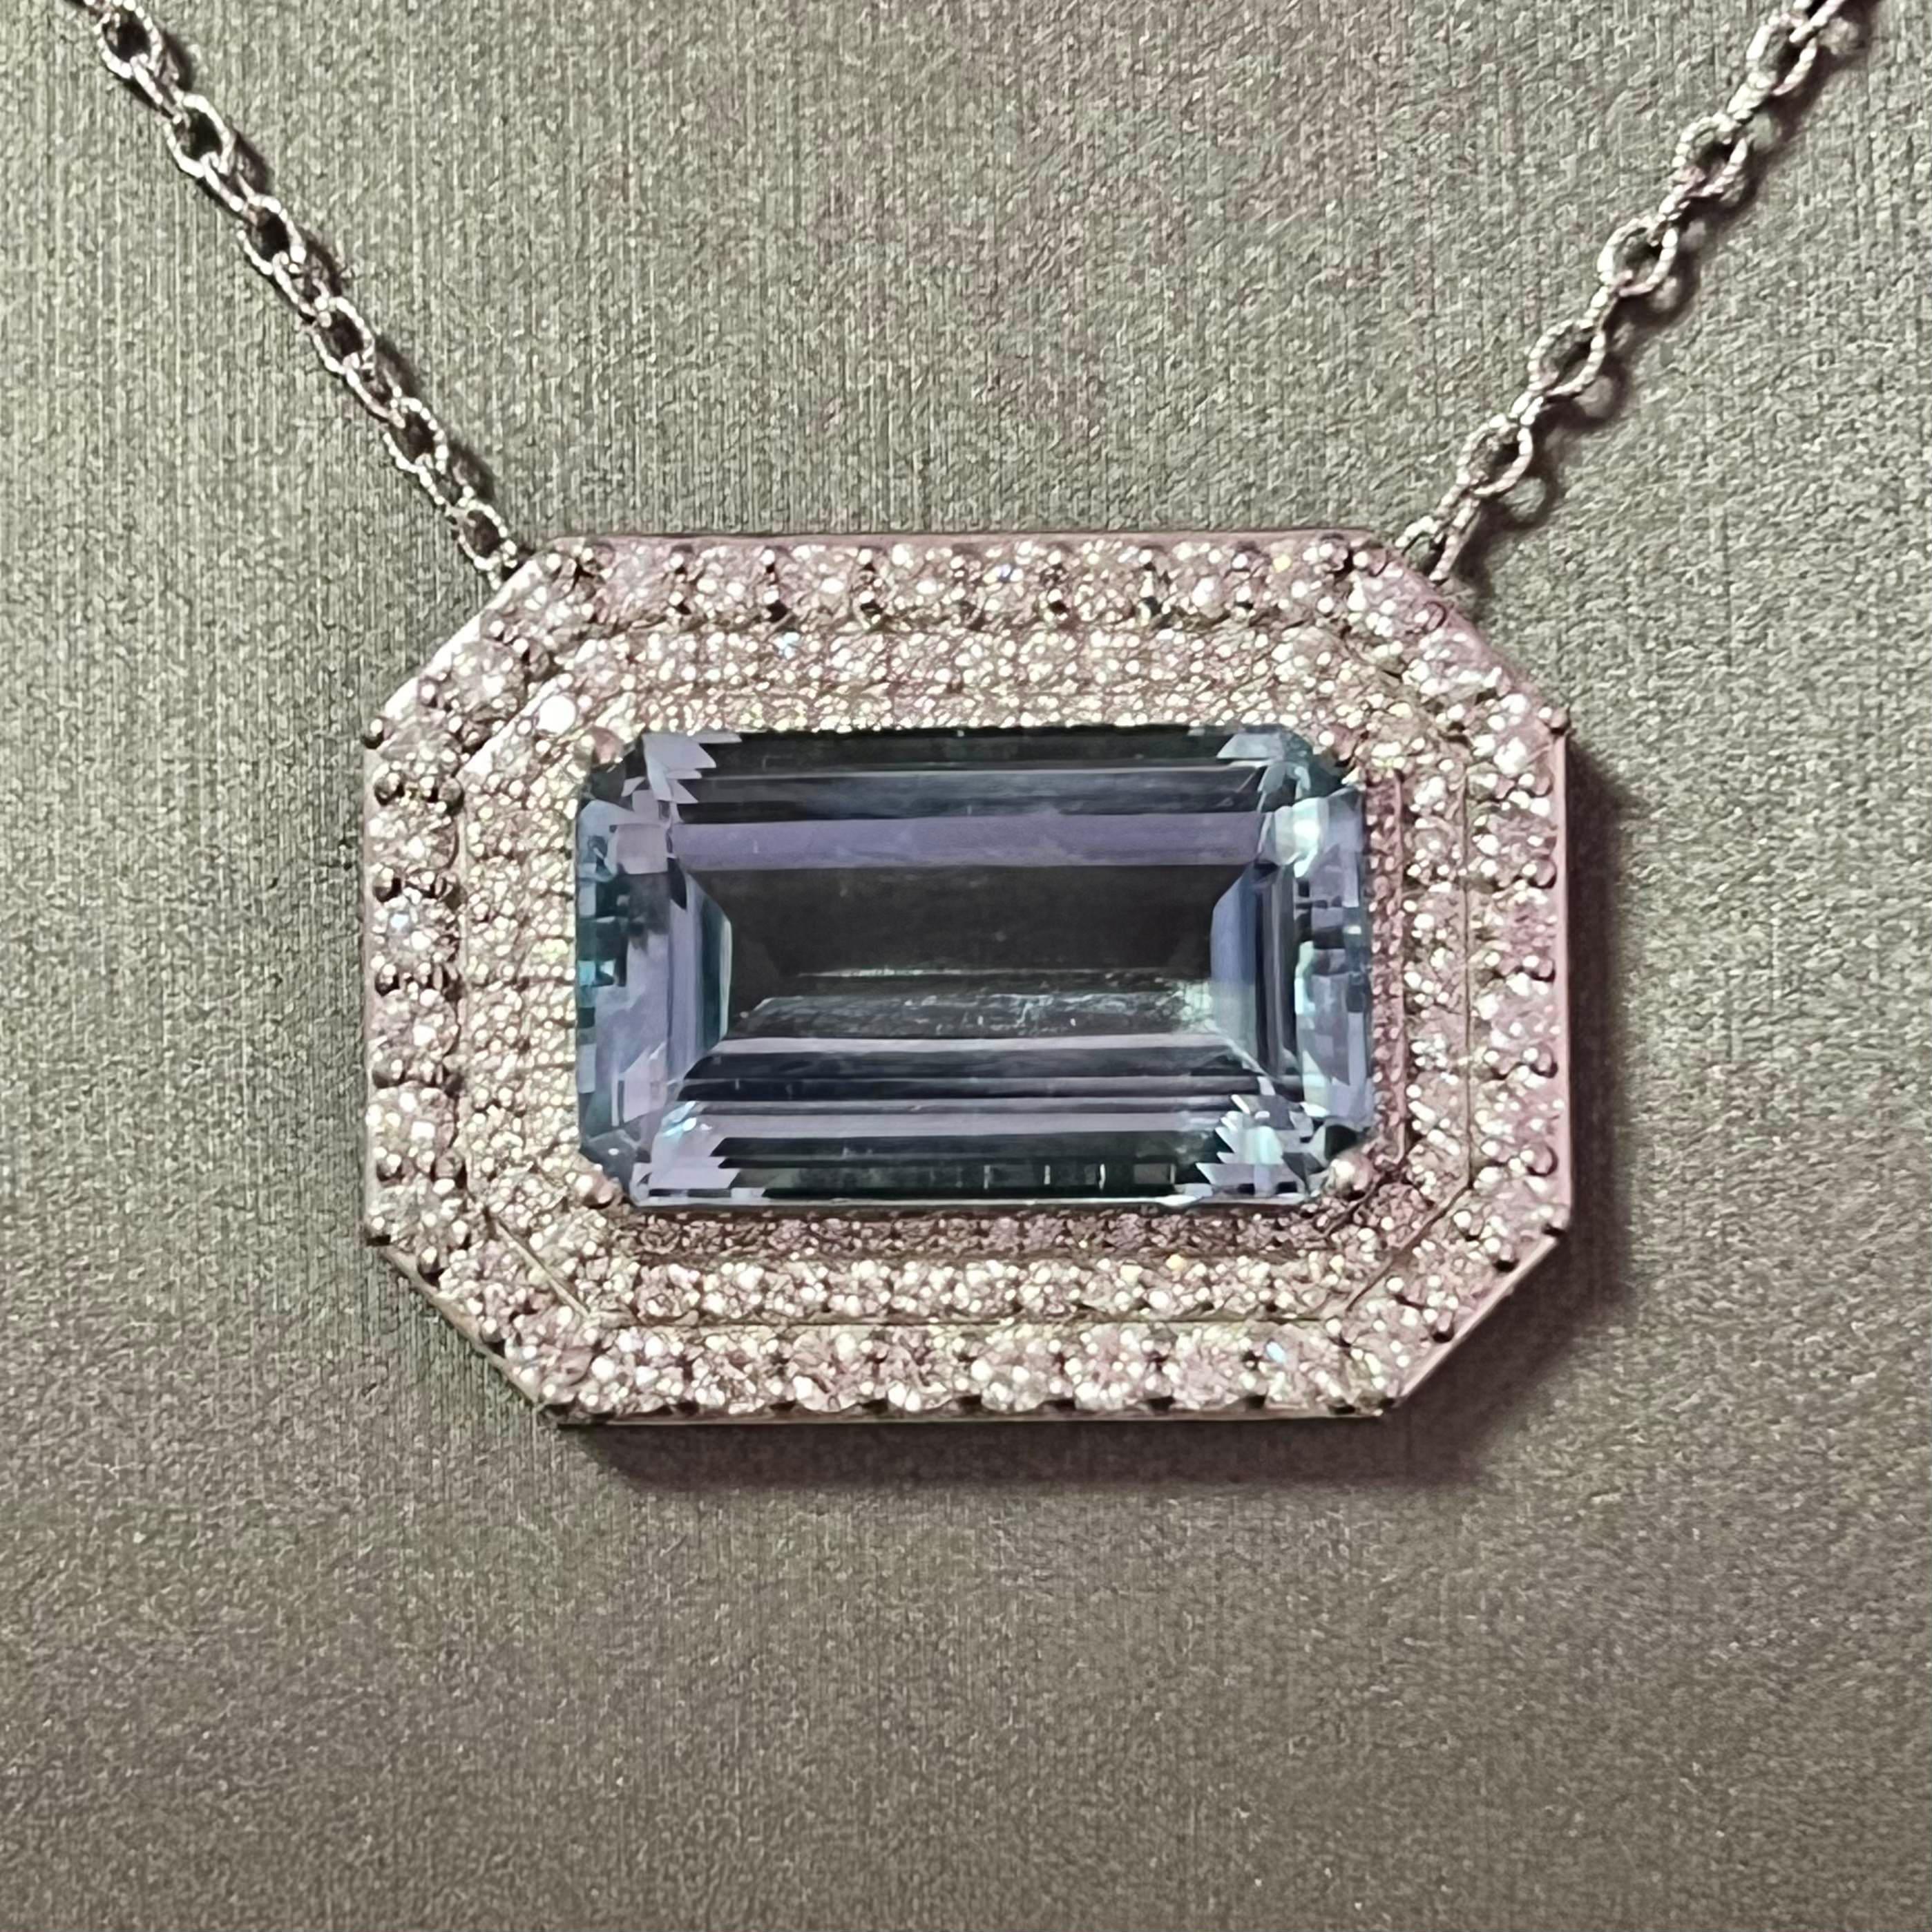 Natural Aquamarine Diamond Necklace 18k Gold 22.74 TCW Certified $14,590 121173

This magnificent pendant is very versatile and can be used both vertical and horizontal.

Nothing says, “I Love you” more than Diamonds and Pearls!

This Aquamarine